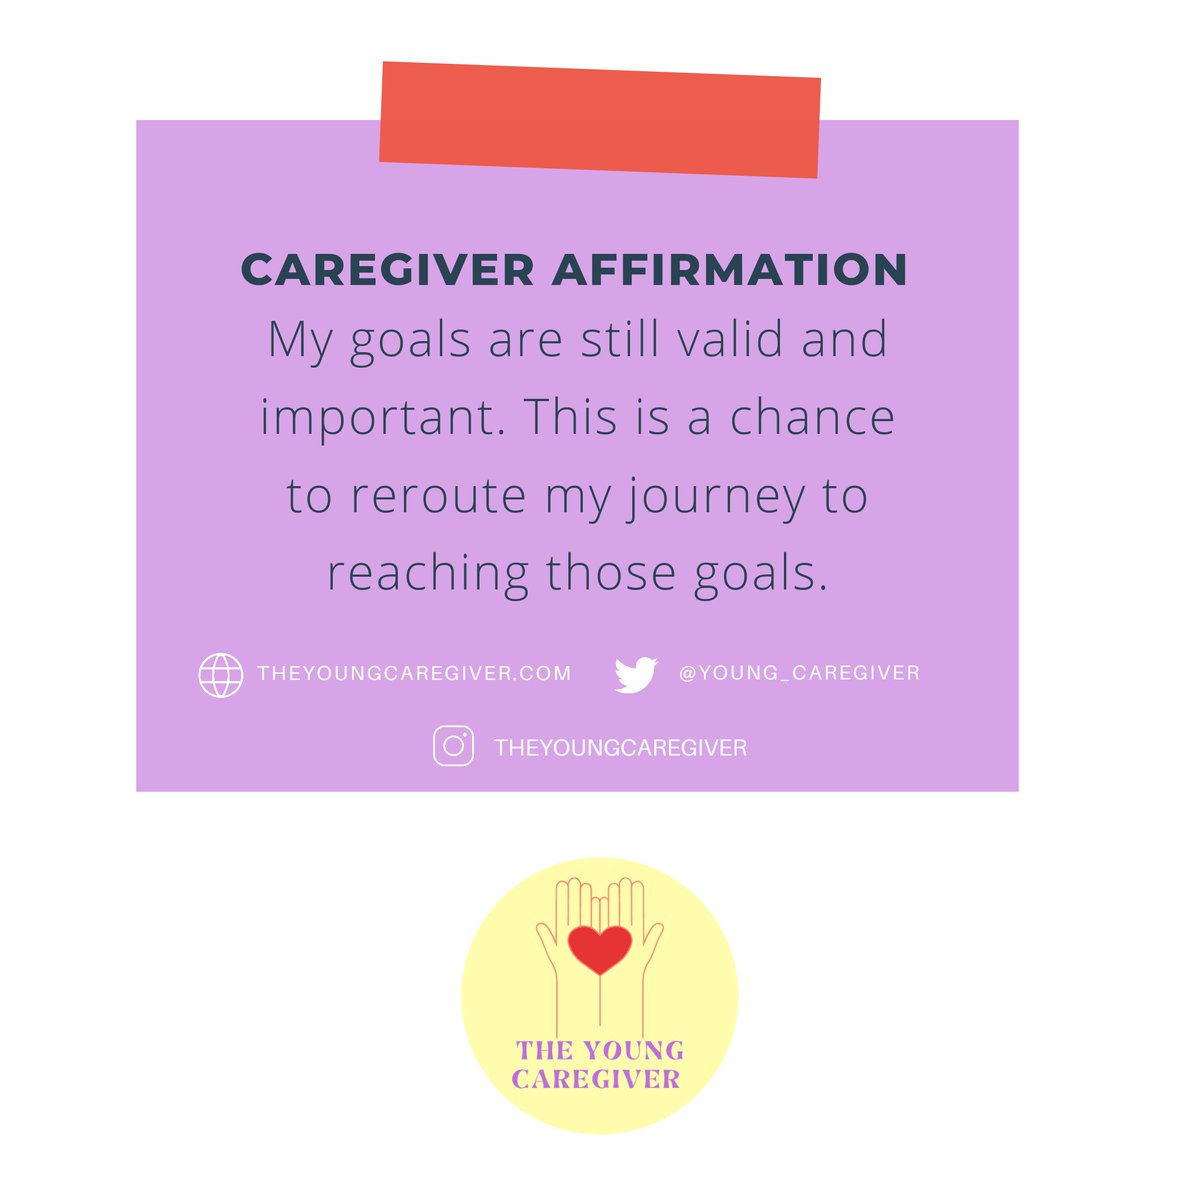 I was working on my Masters in Accounting when I became a caregiver. 3 years into caregiving I took one class a semester until I graduated. My goals stayed the same but I rewrote the plan. #theyoungcaregiver #caregiver #selflove #selfcare #caregiveraffirmations